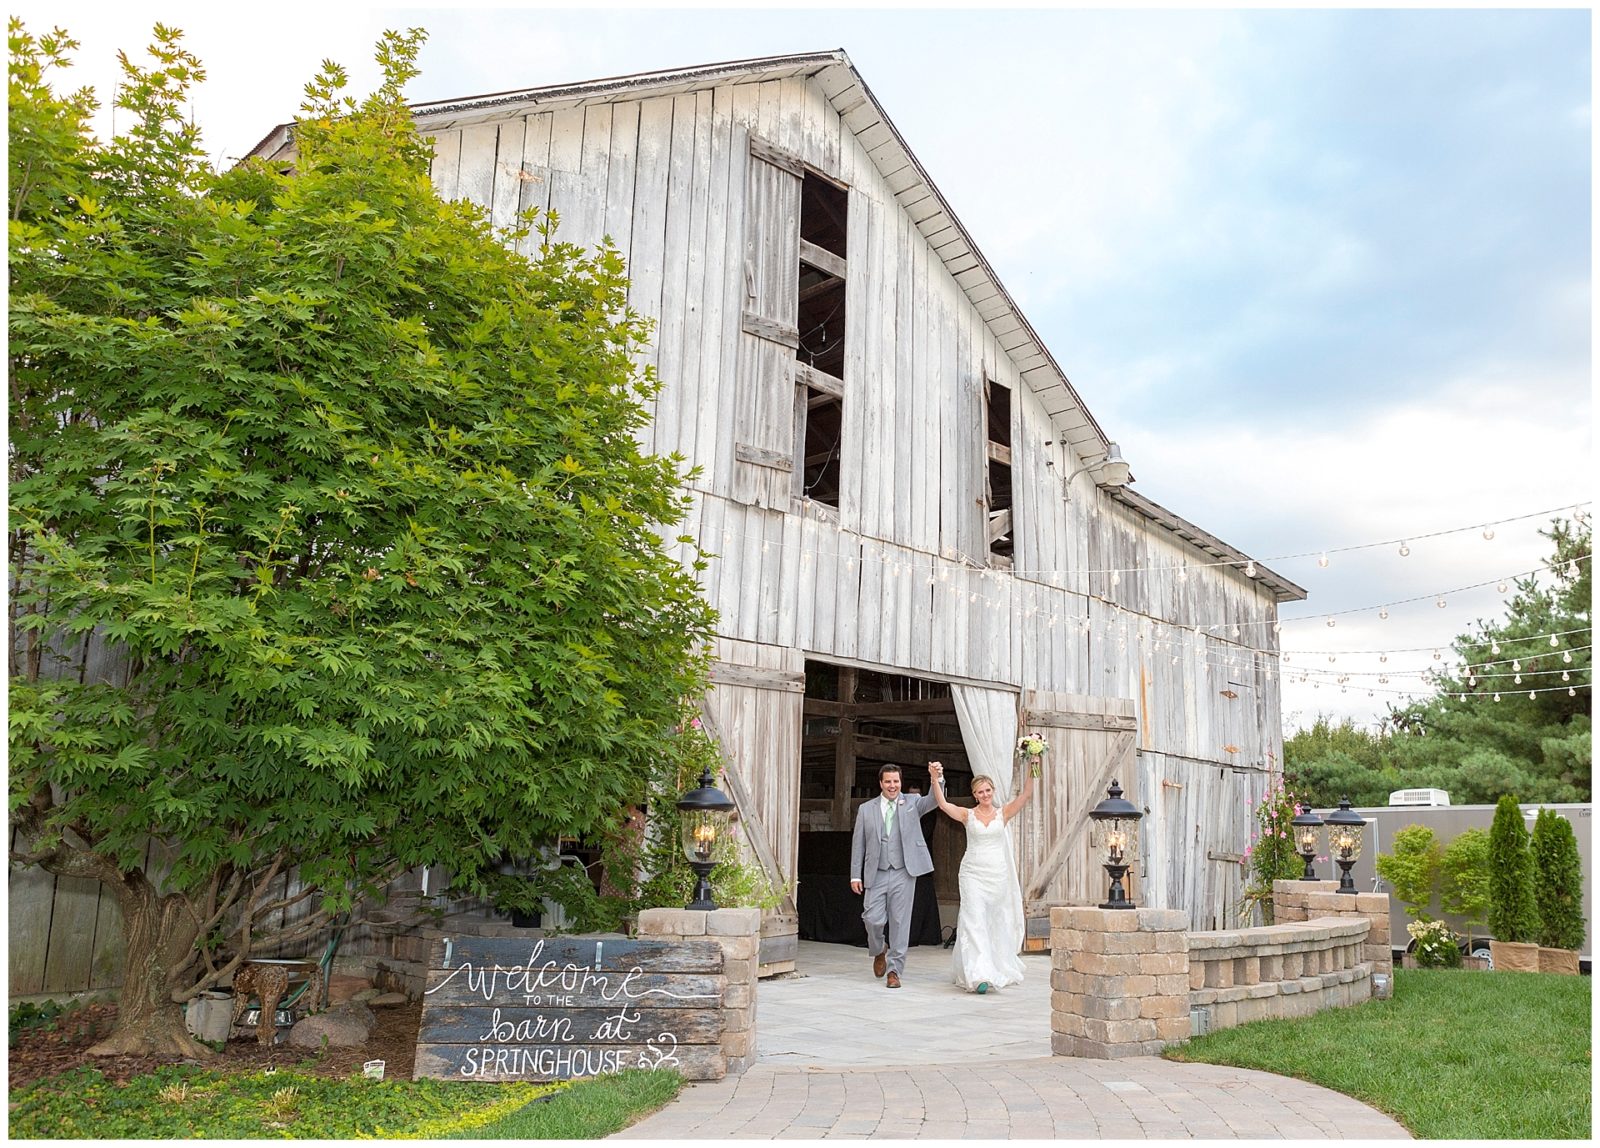 Outdoor wedding and reception at the Barn at Springhouse Gardens in Nicholasville, Kentucky. The bridal suite was at the 21c Museum Hotel in Lexington, KY. Wedding Photography by Kevin and Anna Photography www.kevinandannaweddings.com